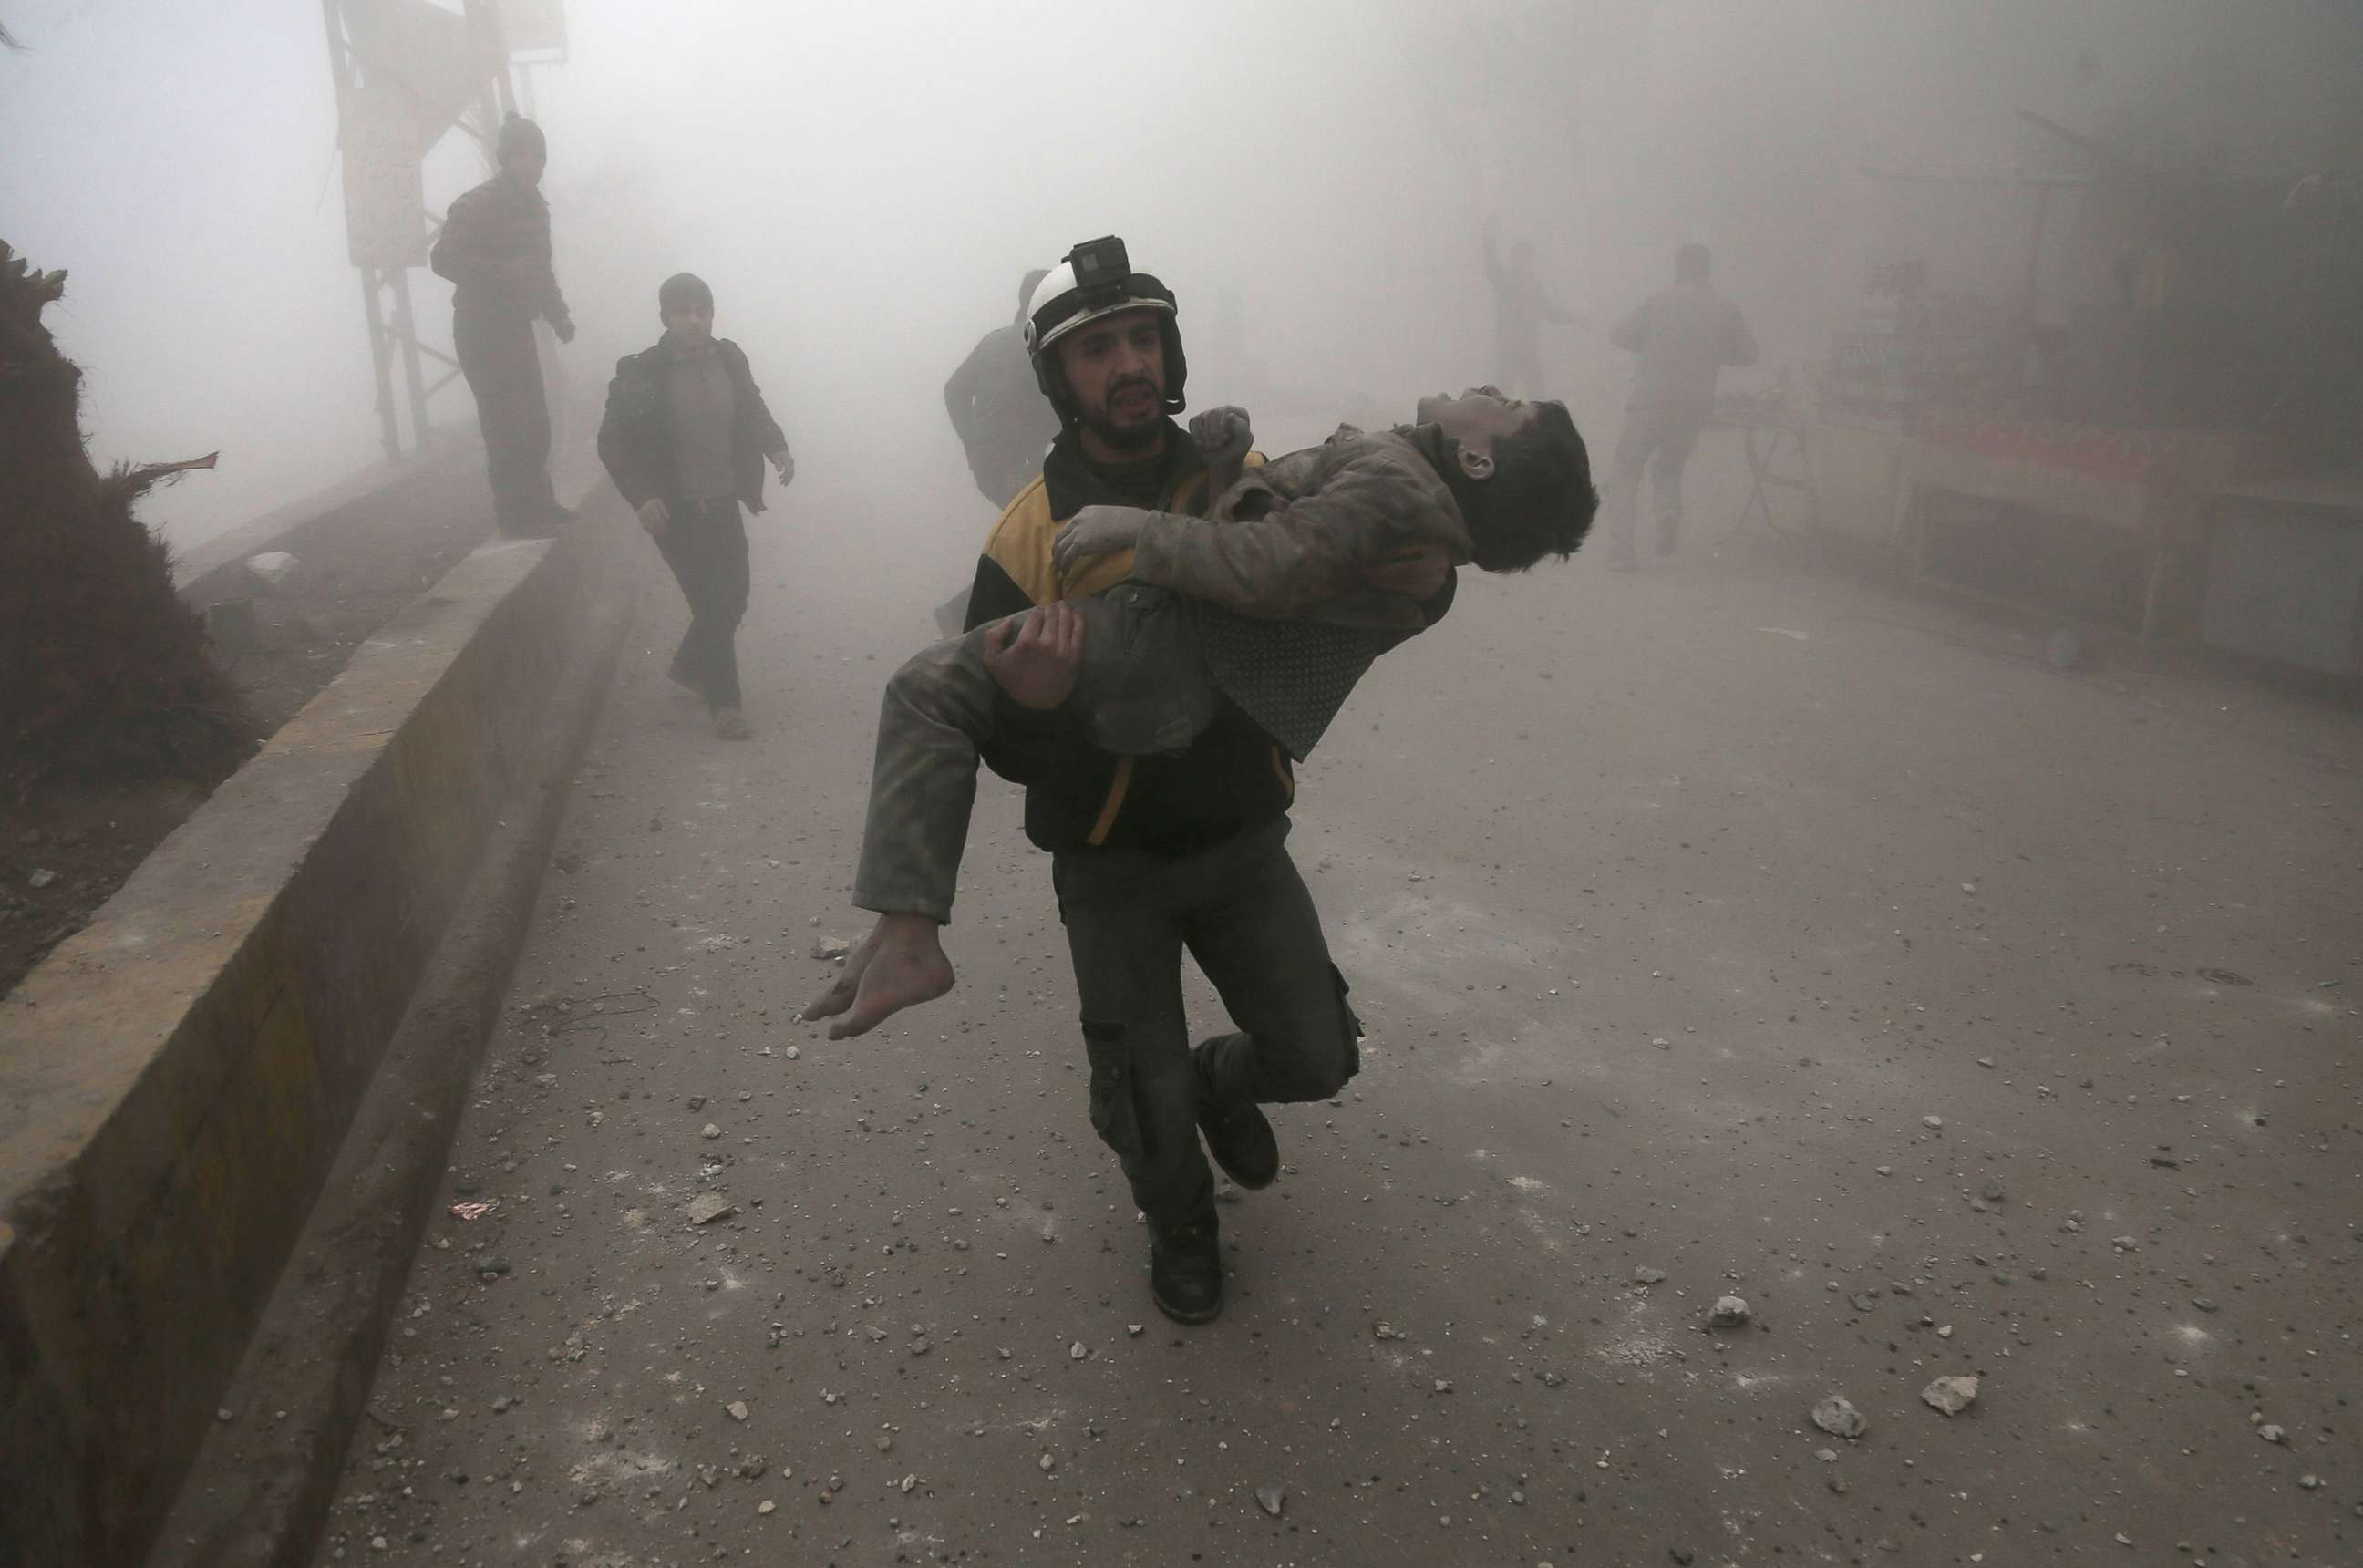 PHOTO: A volunteer from the Syrian Civil Defence, known as the White Helmets, carries a wounded boy after digging him out of the rubble following an air strike in the besieged rebel-held Eastern Ghouta area near Damascus, Syria, Jan. 9, 2018.